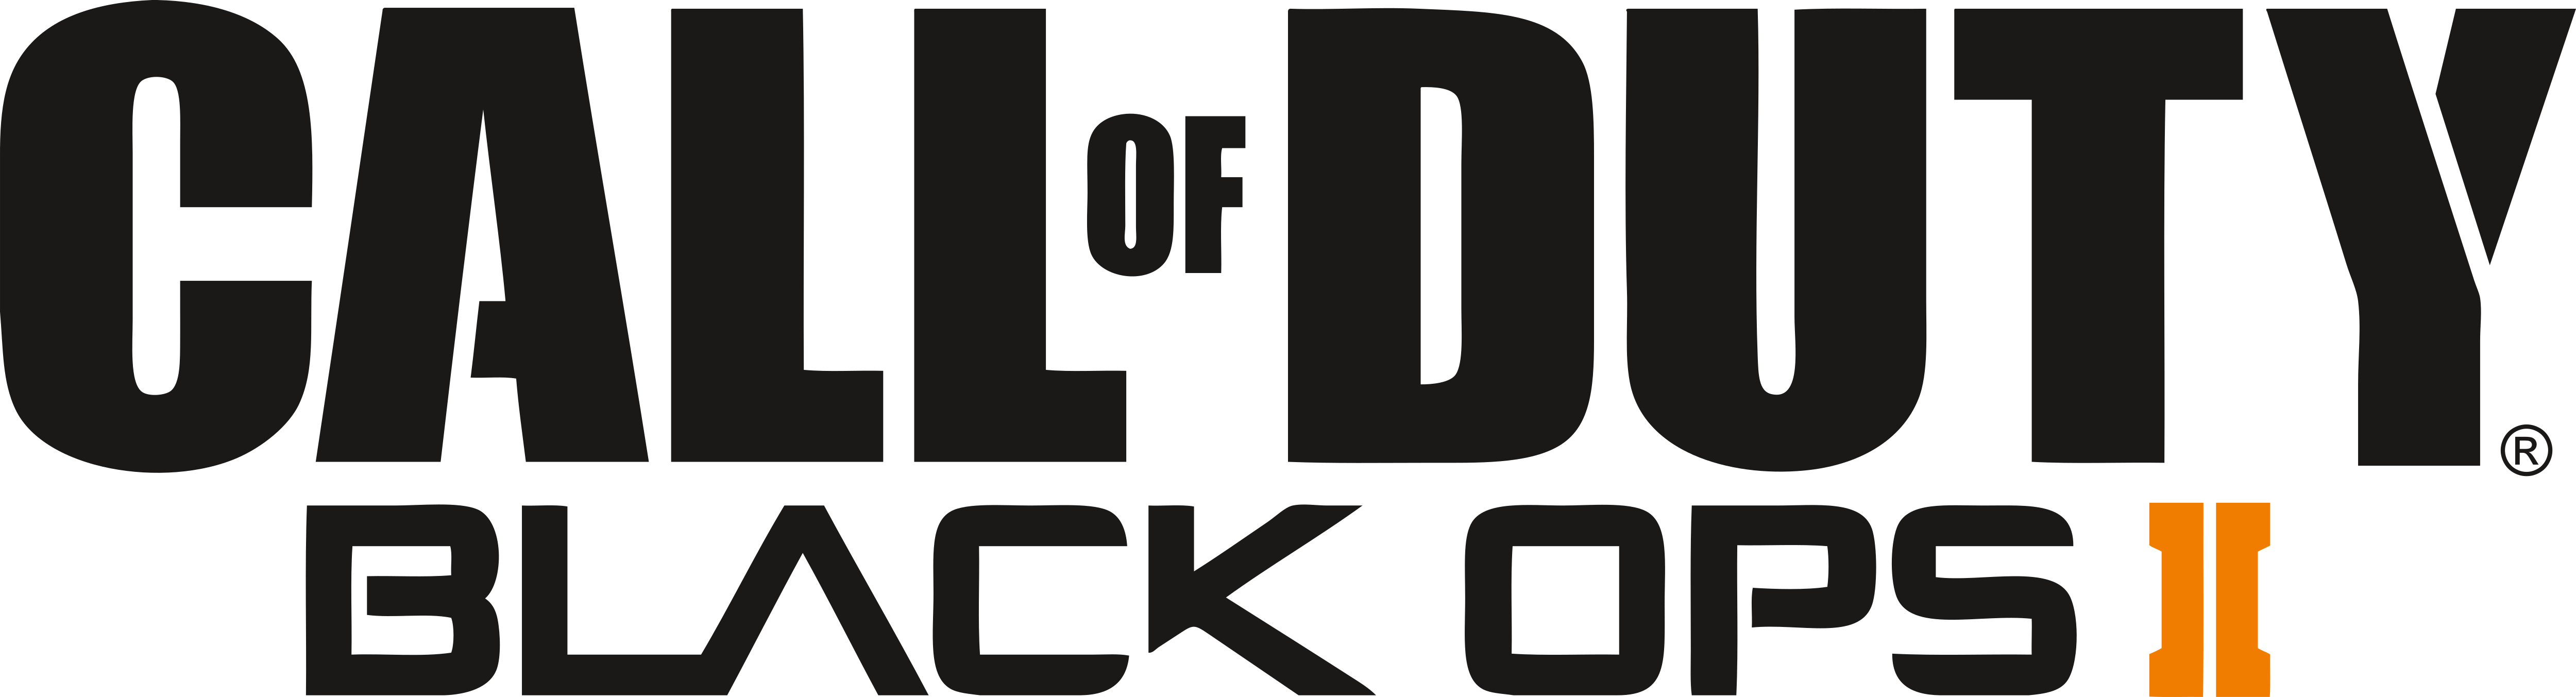 Call Of Duty Logo PNG - 180023